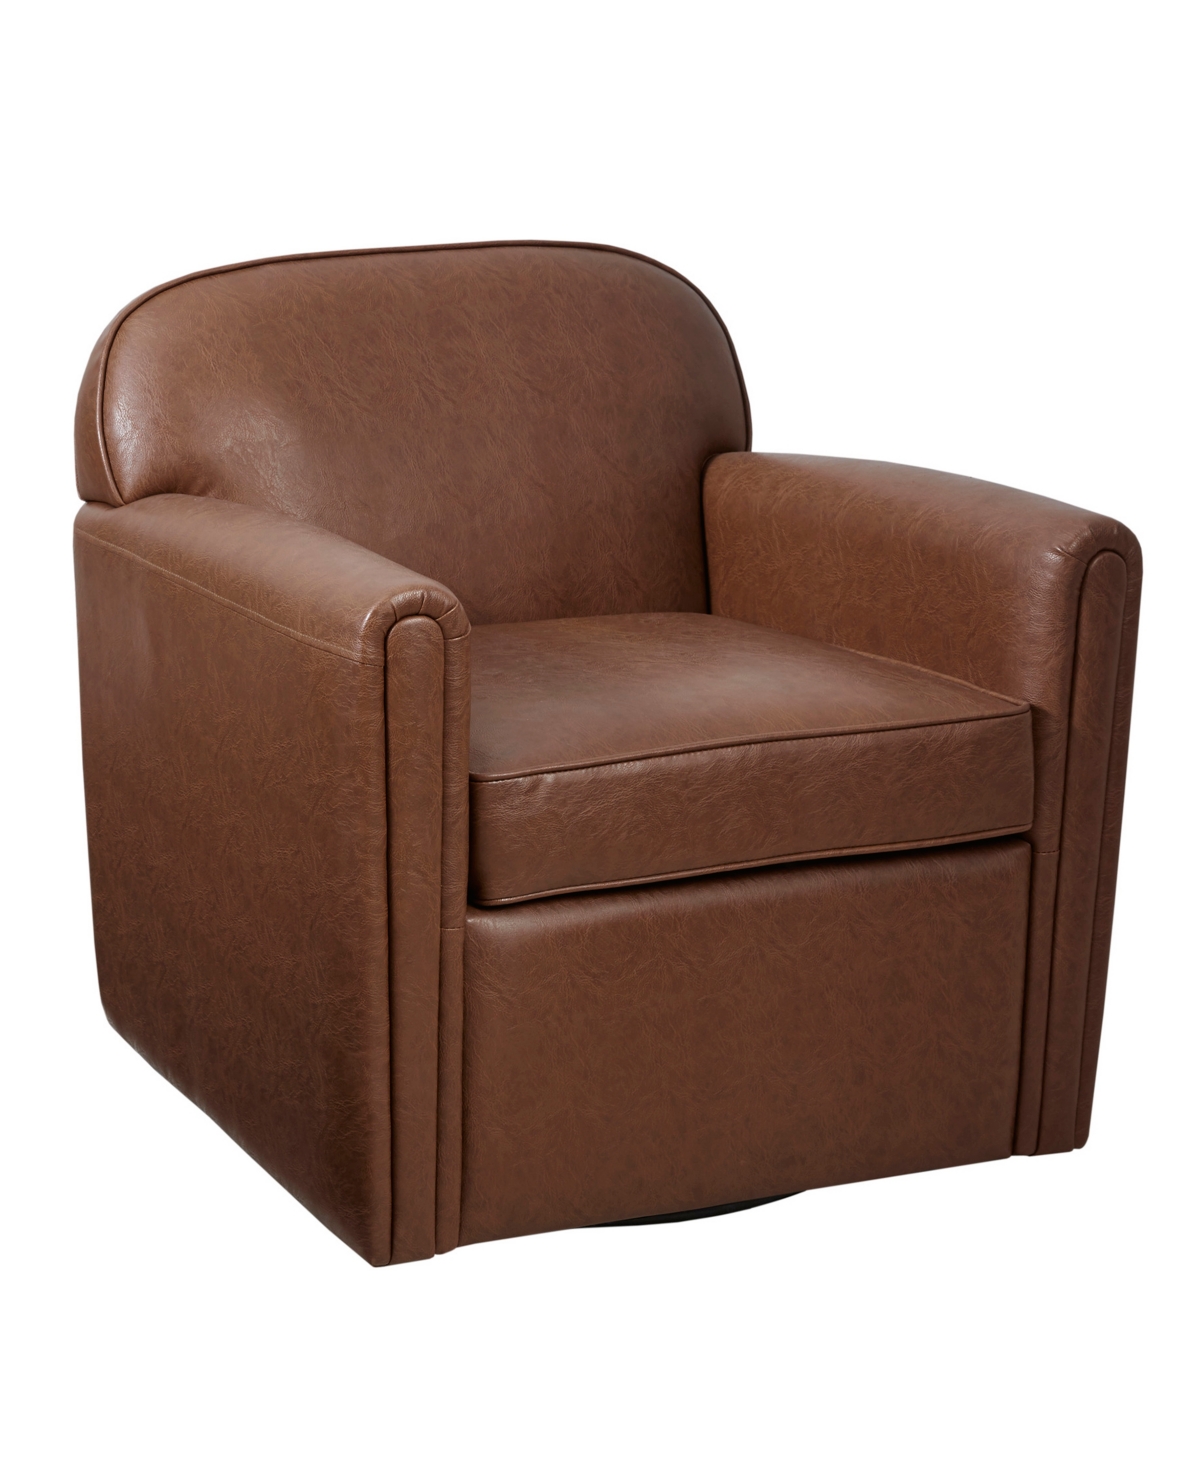 Madison Park Archer 30.5" Wide Faux Leather 360 Degree Swivel Arm Chair In Brown